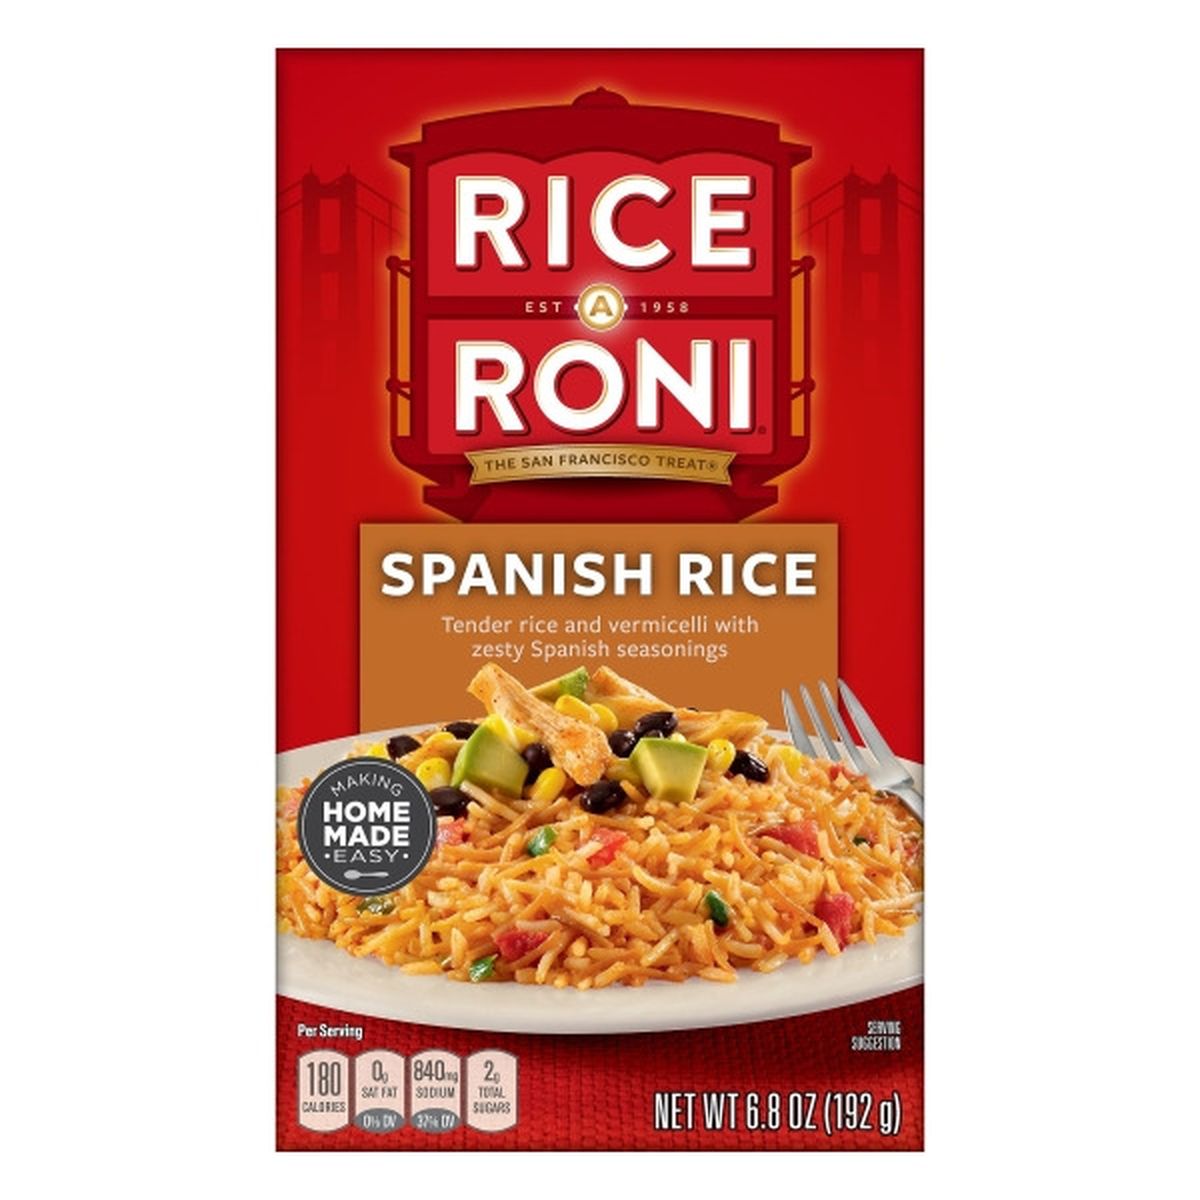 Calories in Rice-a-Roni Spanish Rice